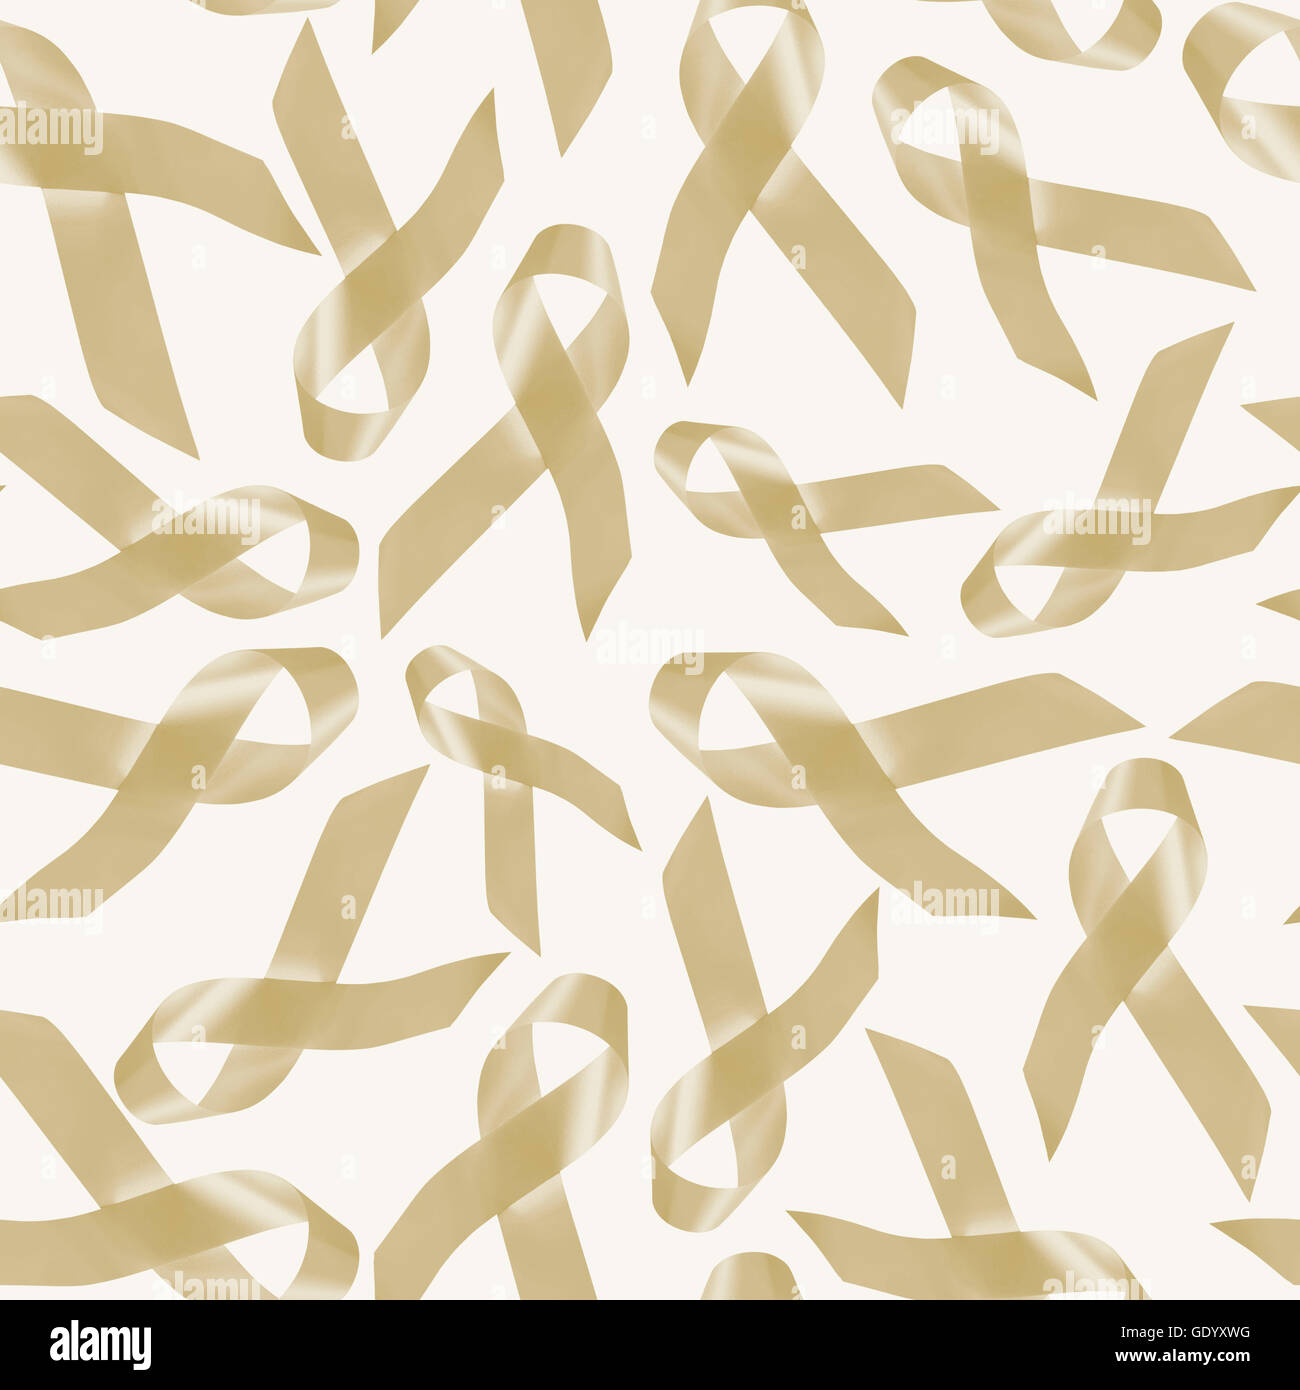 Child cancer awareness background, seamless pattern made of gold ribbons for support. Stock Photo